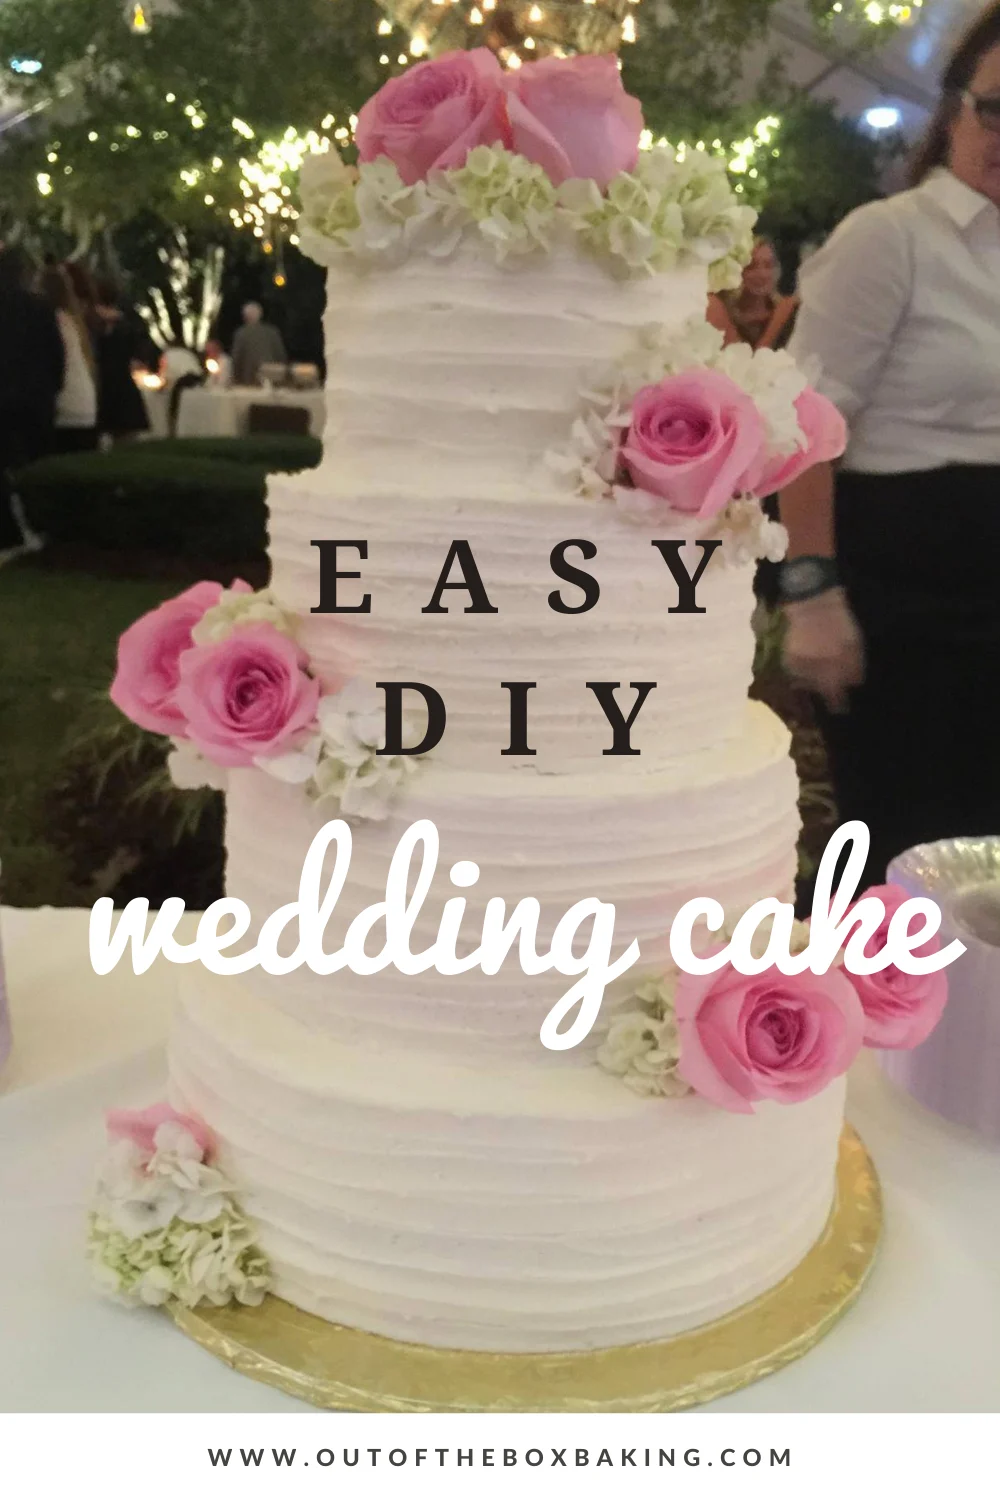 6 Tier Wedding Cake with Central Hole - The Cakery - Leamington Spa &  Warwickshire Cake Boutique